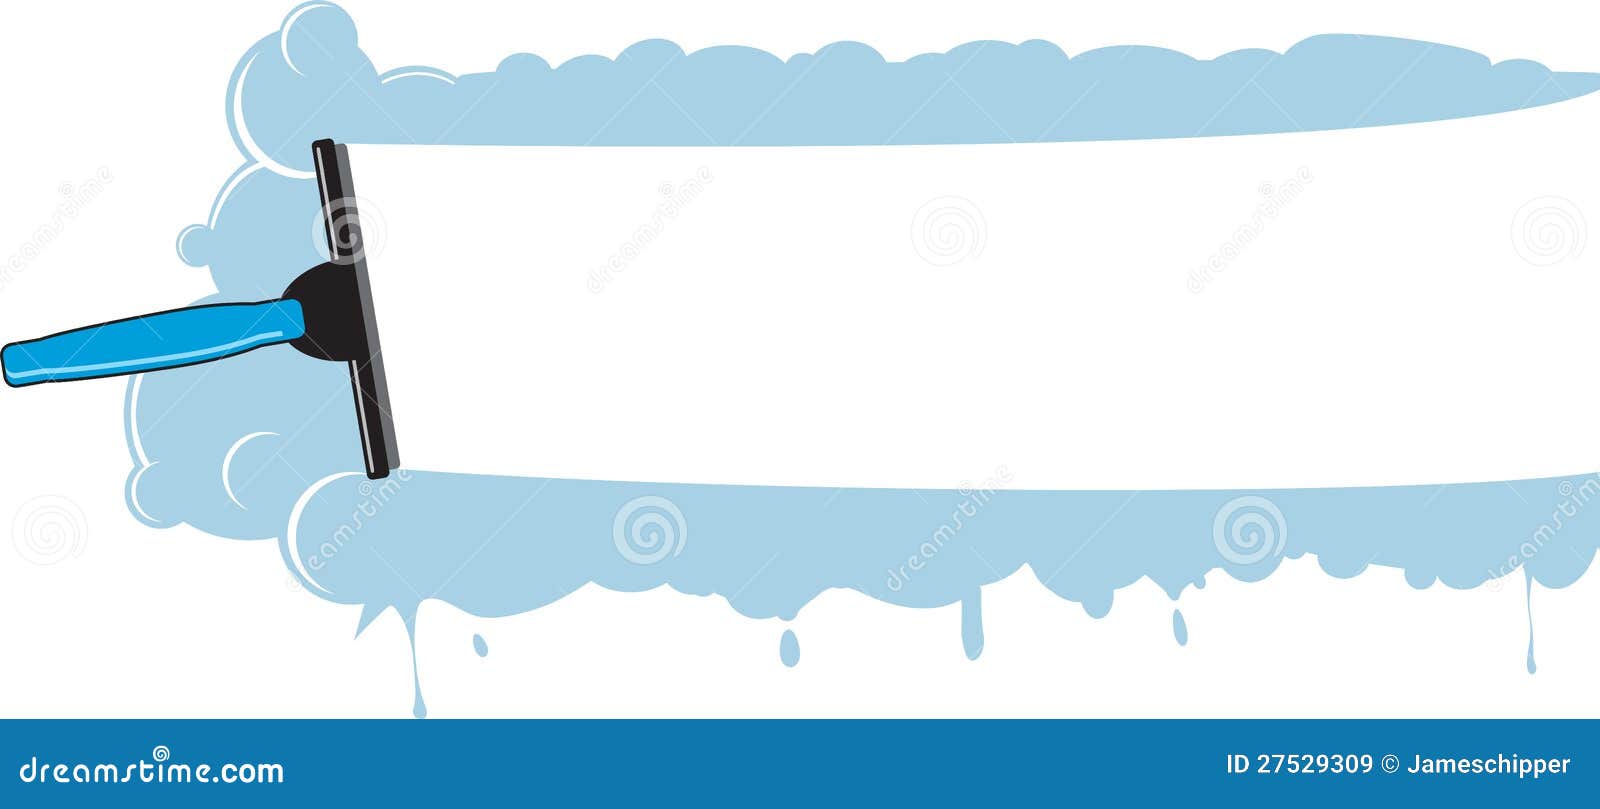 window squeegee clipart - photo #14